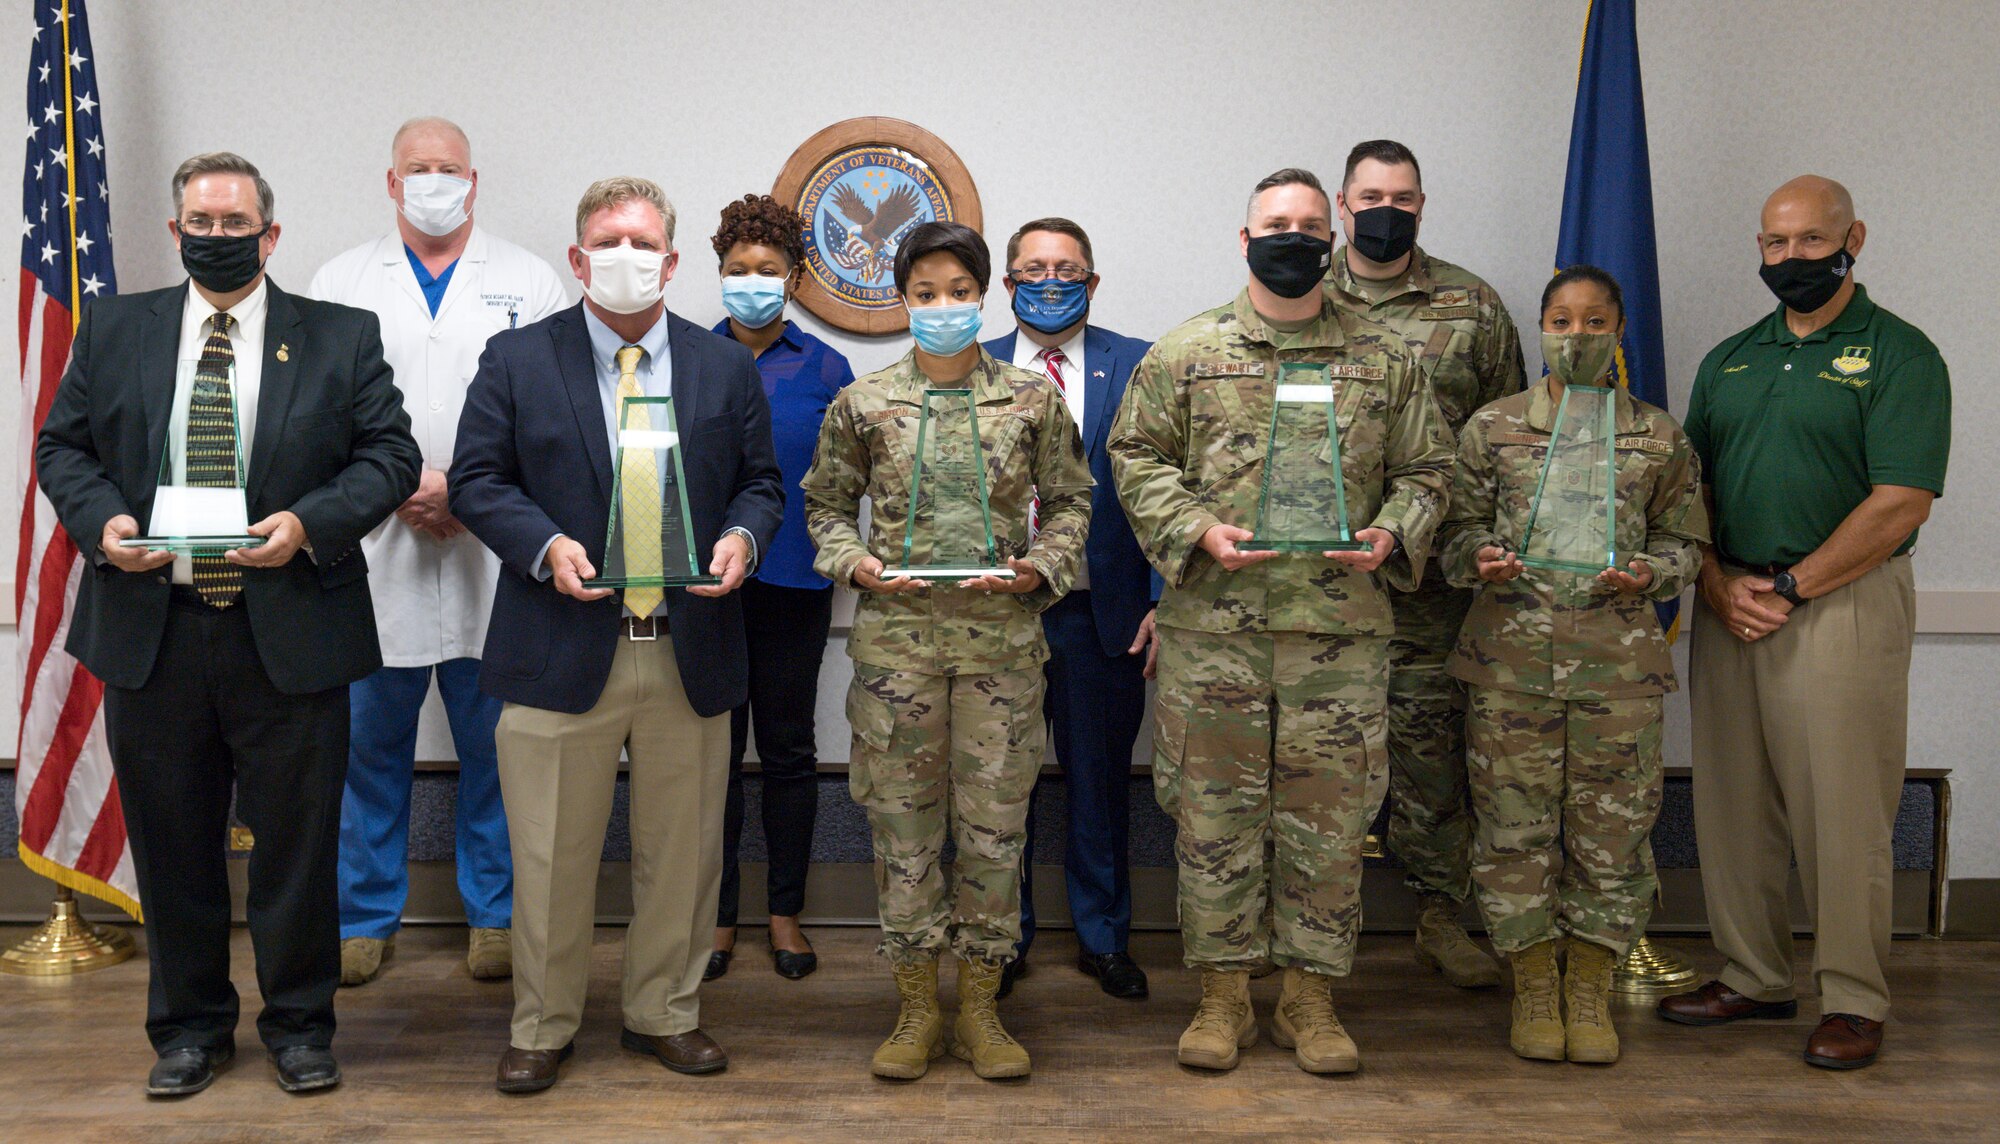 Recipients of the Department of Veteran’s Affairs Alternate Dispute Resolution Team Award pose for a photo with Overton Brooks Veteran’s Affairs Medical Center and 2nd Bomb Wing leadership at Overton Brooks VAMC in Shreveport, La., April 14, 2020.